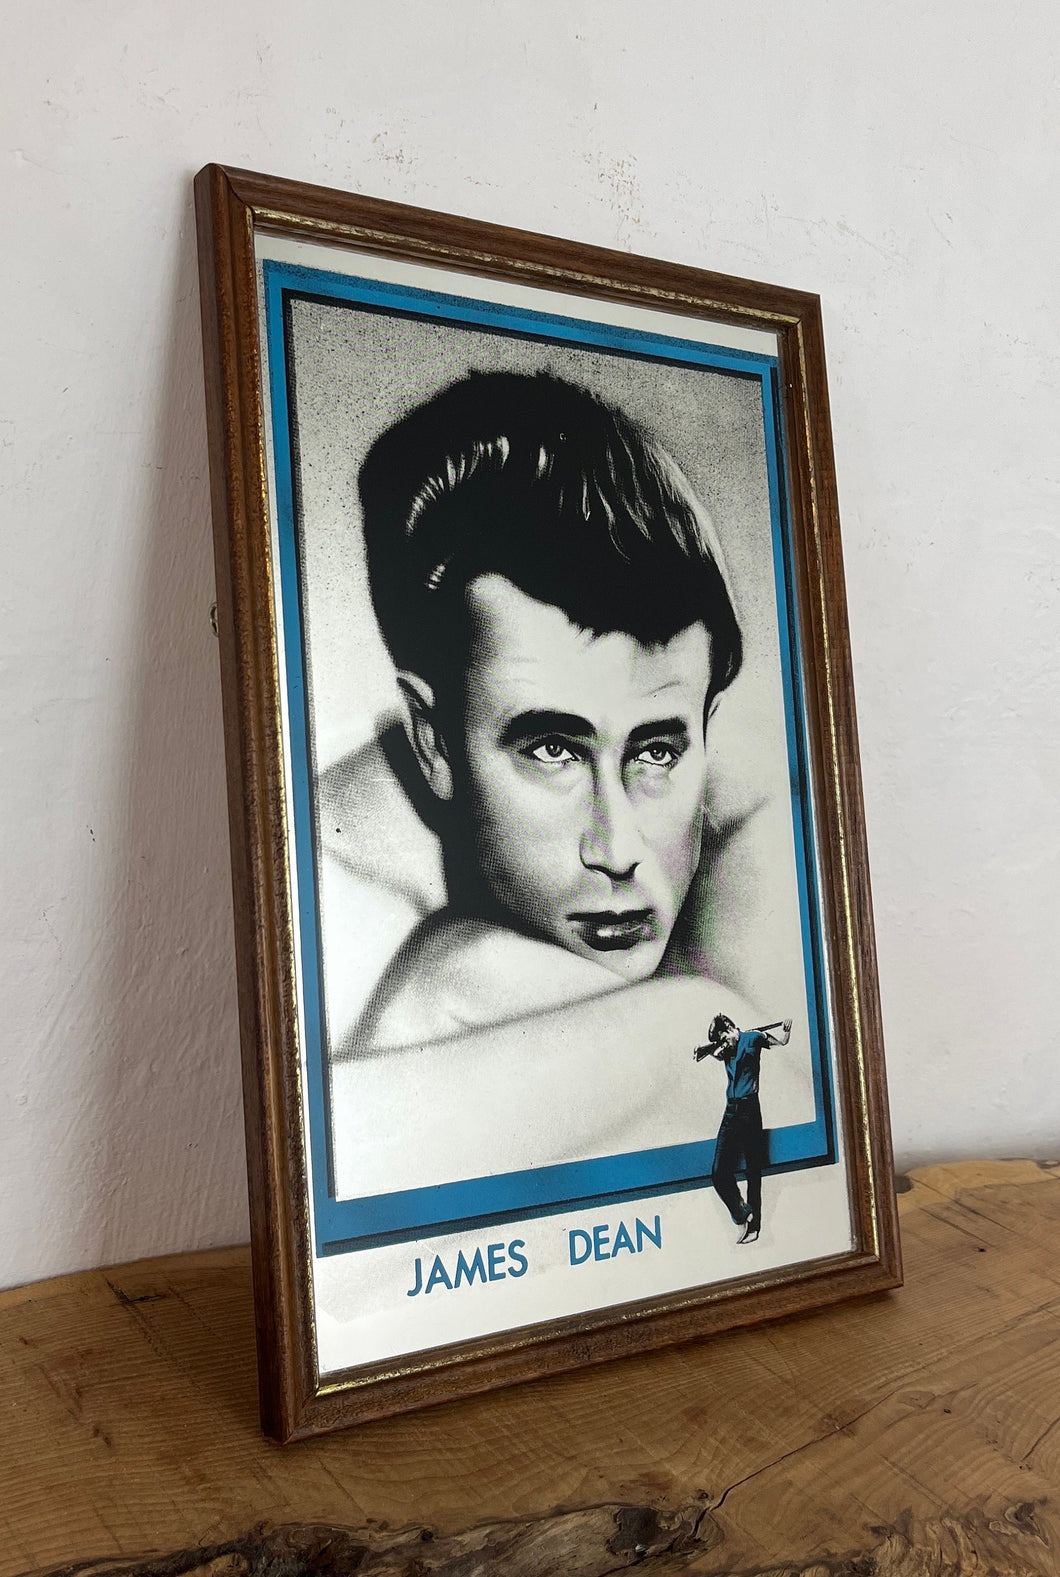 This is a vintage mirror featuring James Dean, the iconic movie actor. It is a unique collectible item that showcases excellent detail in depicting the actor's signature pose and famous look.